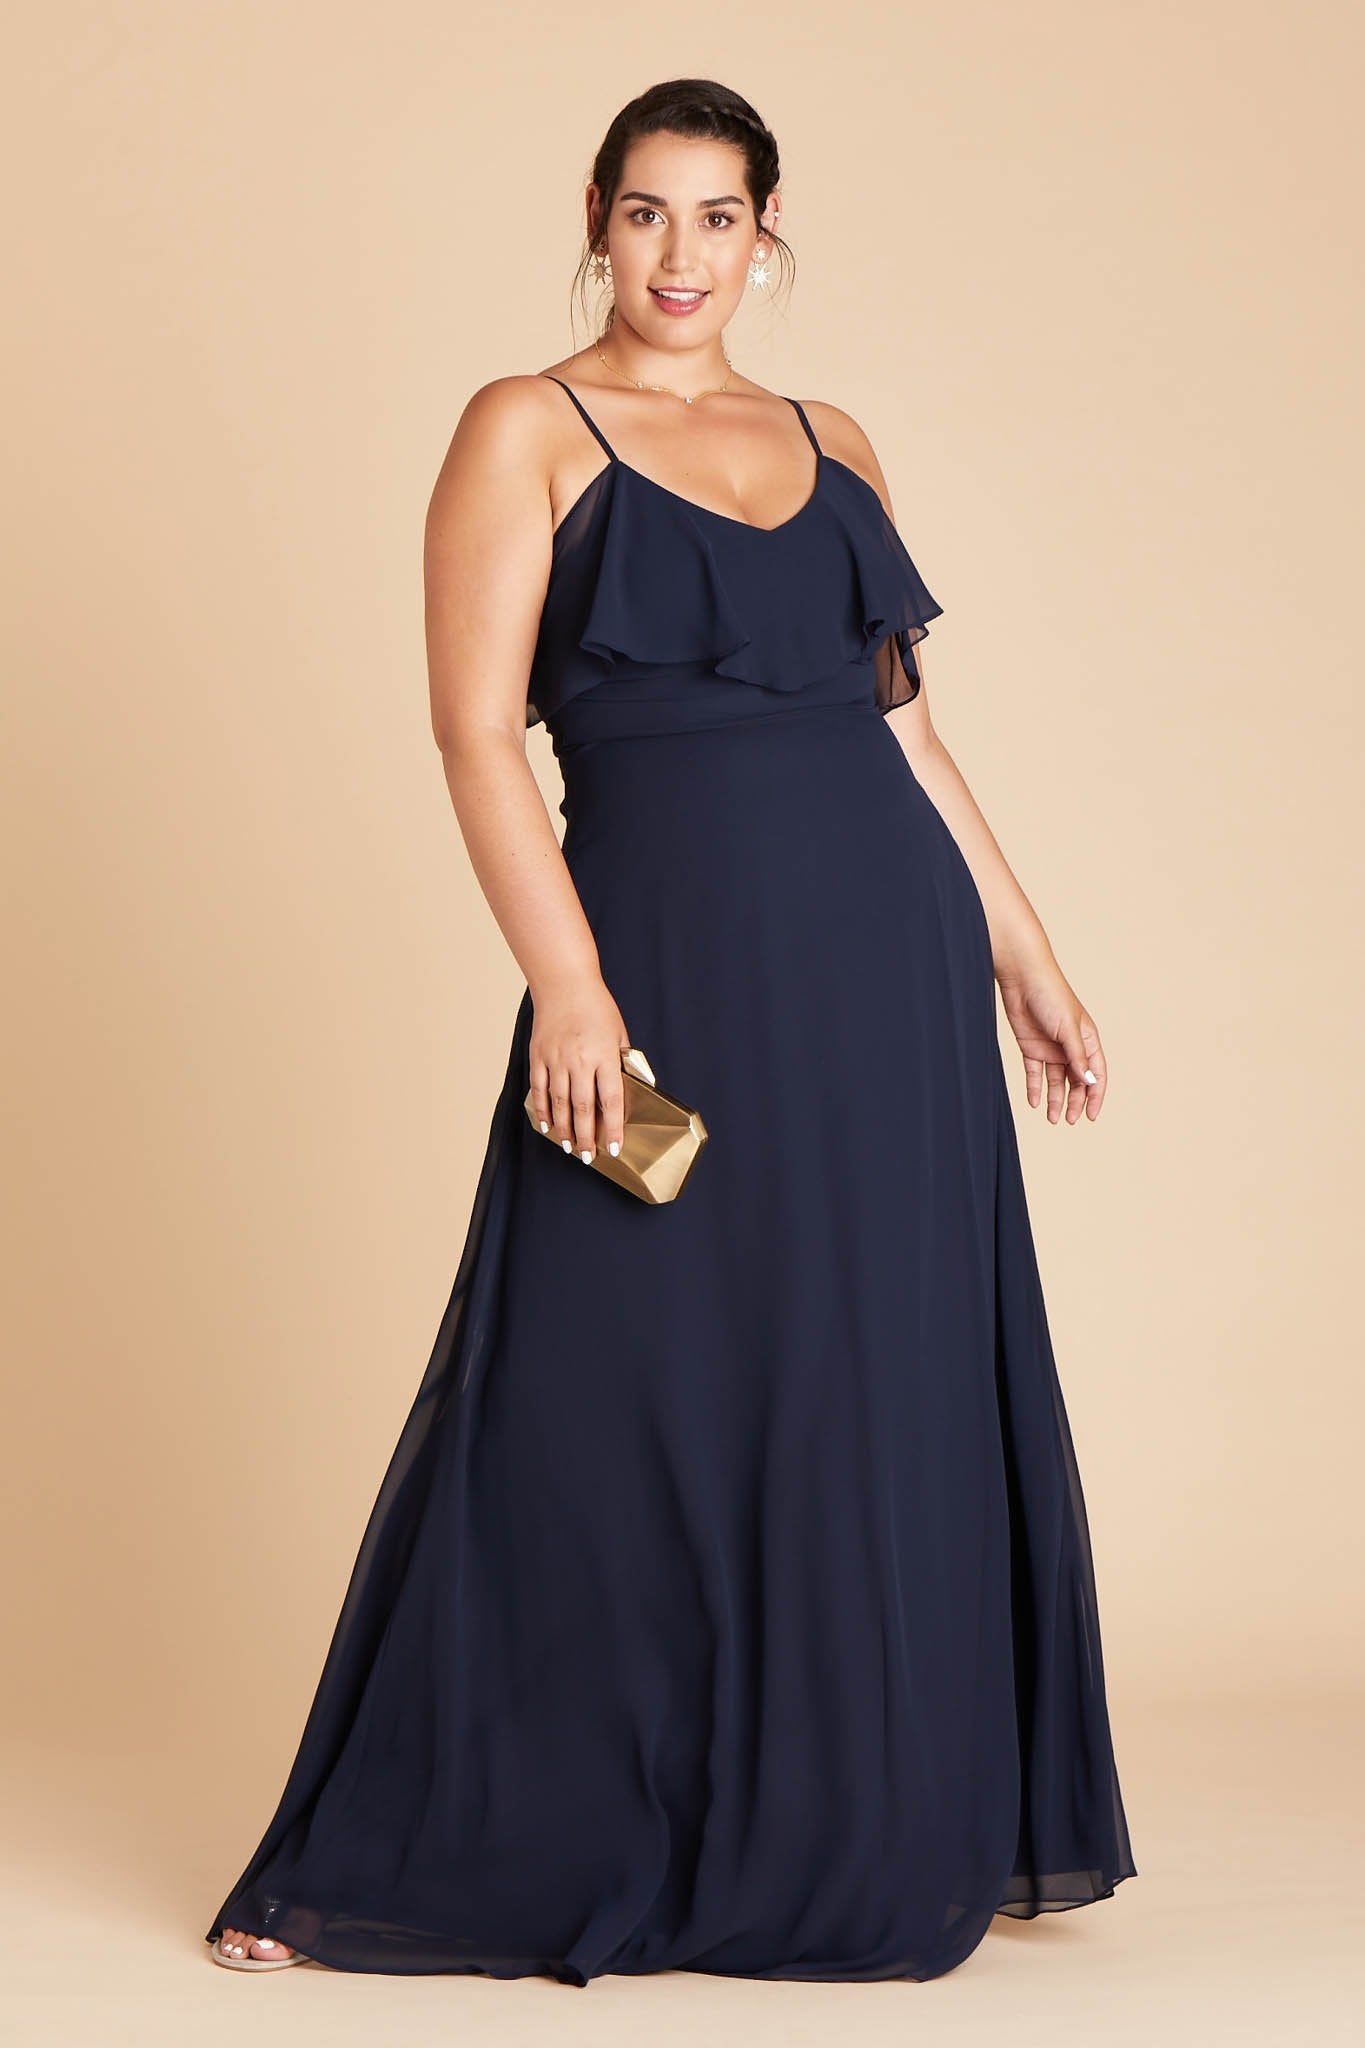 Jane convertible plus size bridesmaid dress in navy blue chiffon by Birdy Grey, front view